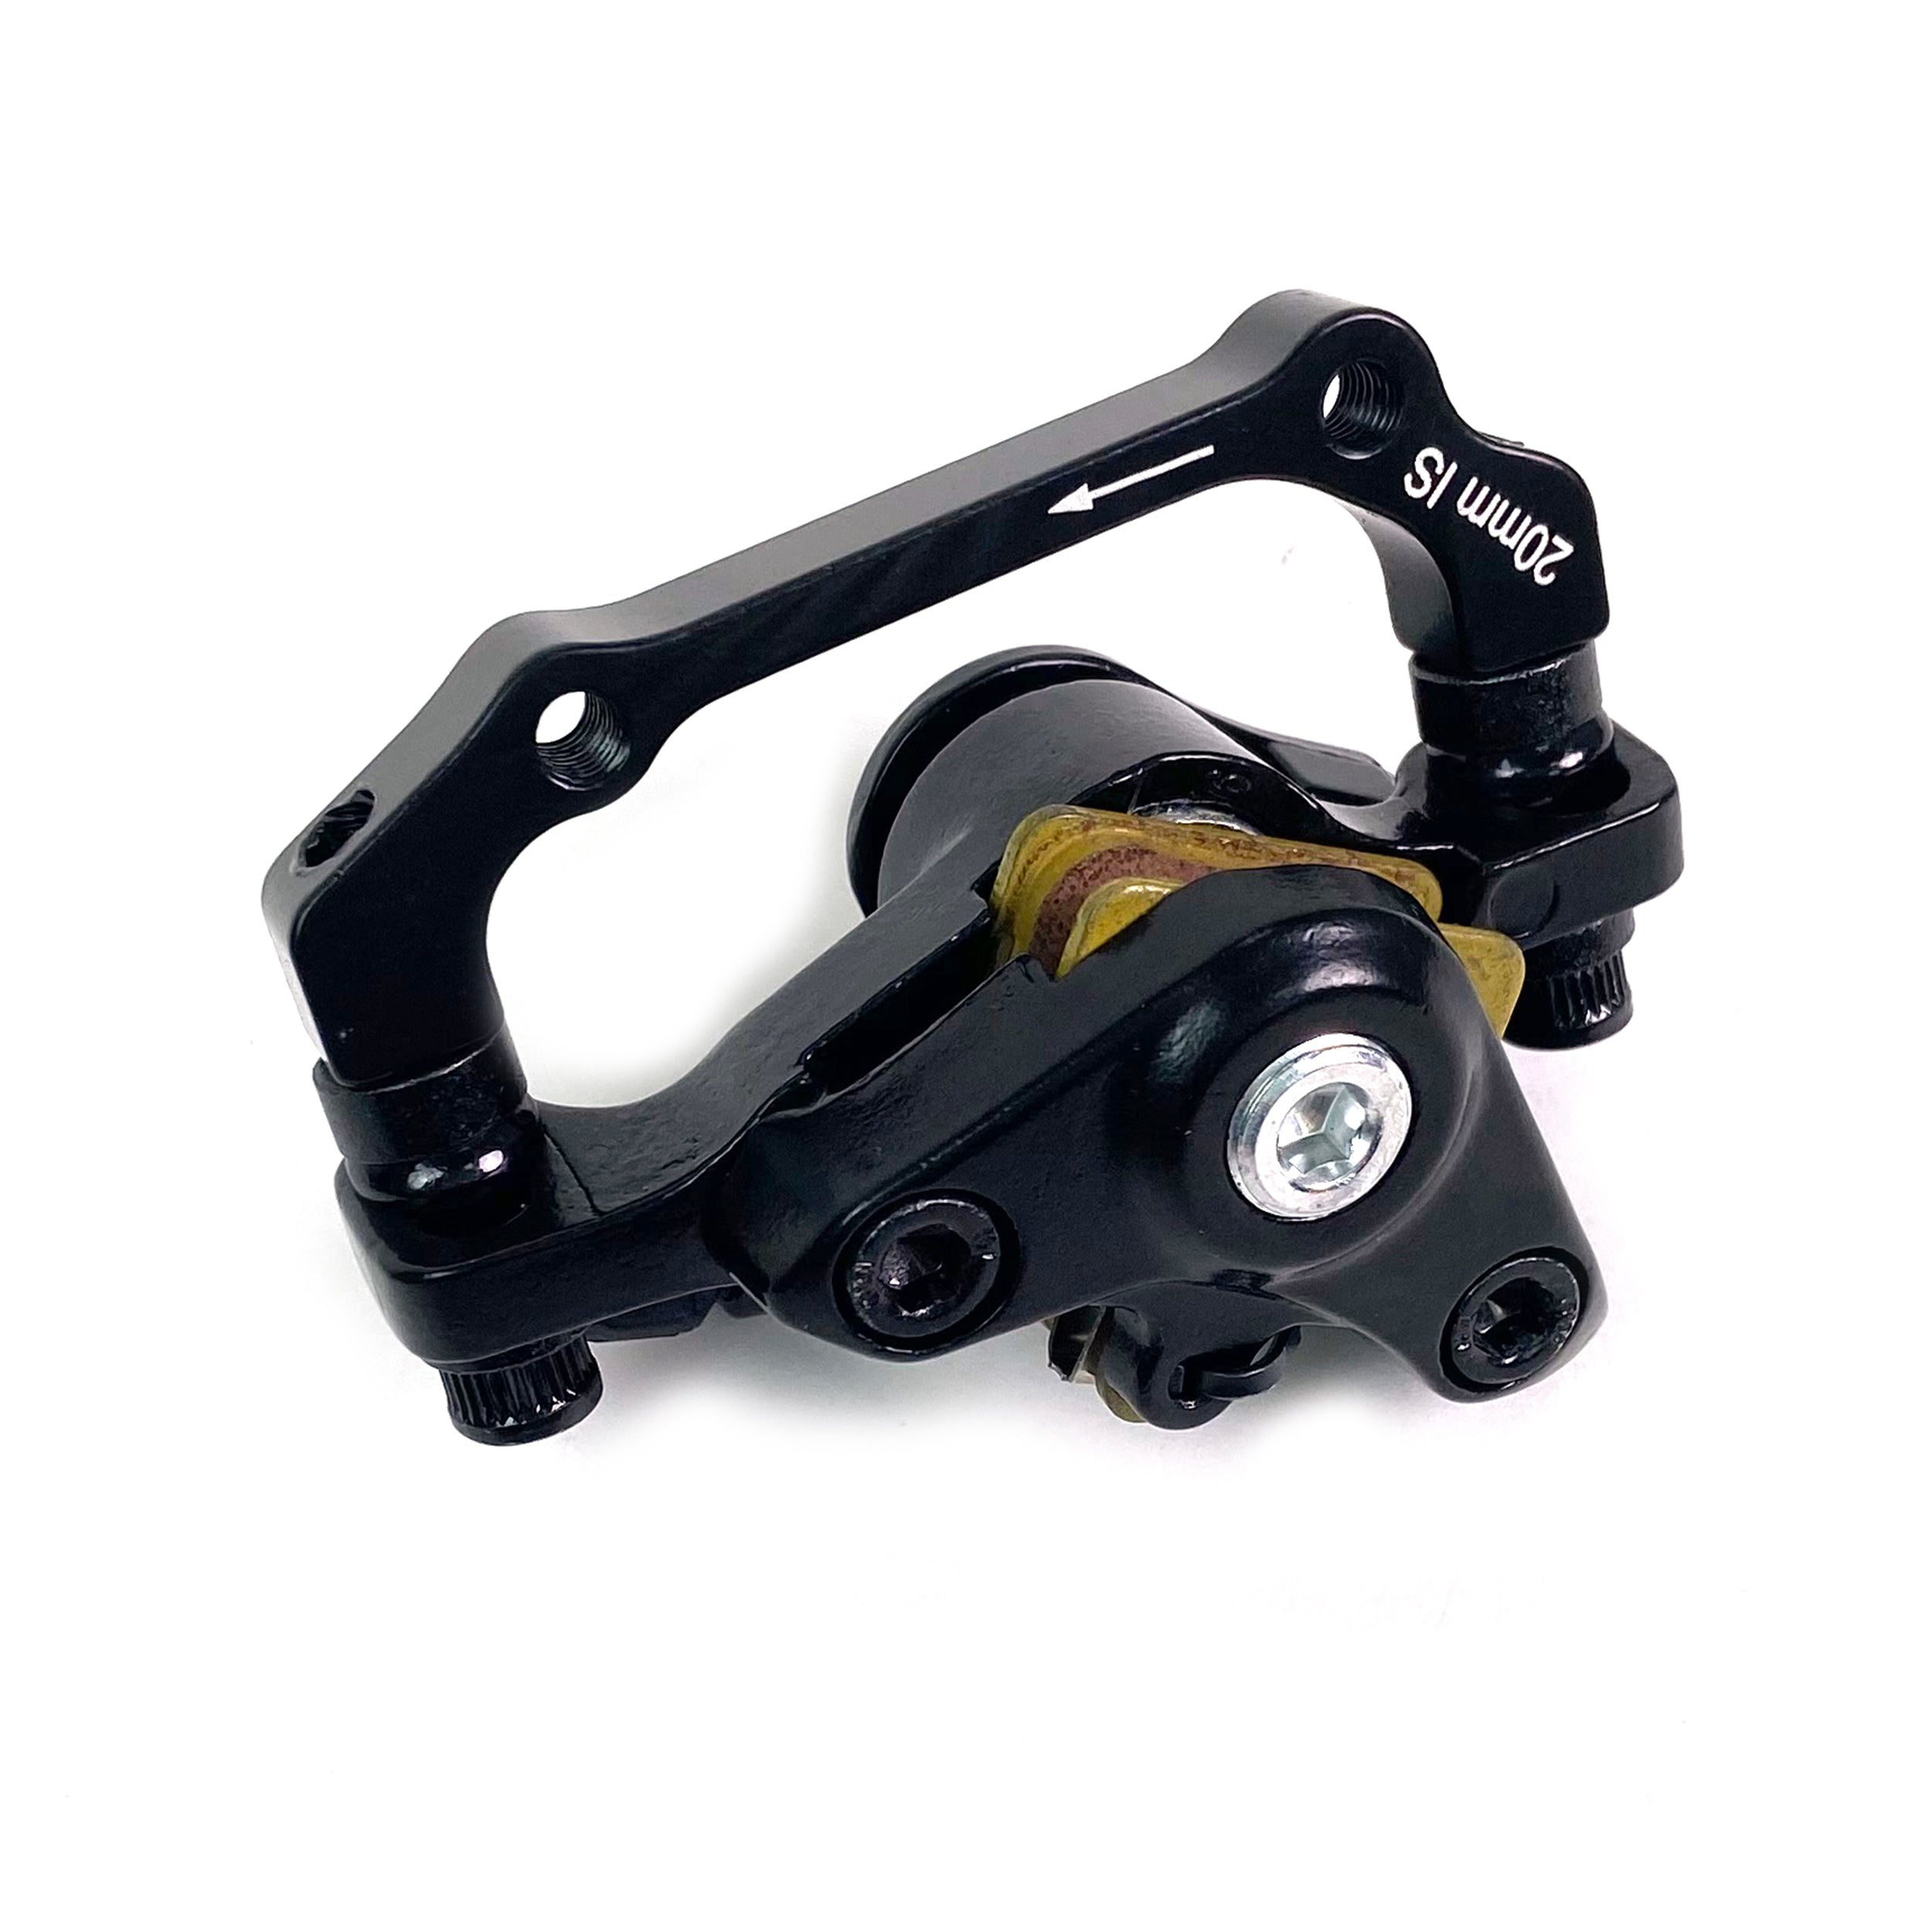 BRAKE SYSTEM FOR COSWHEEL EBIKE